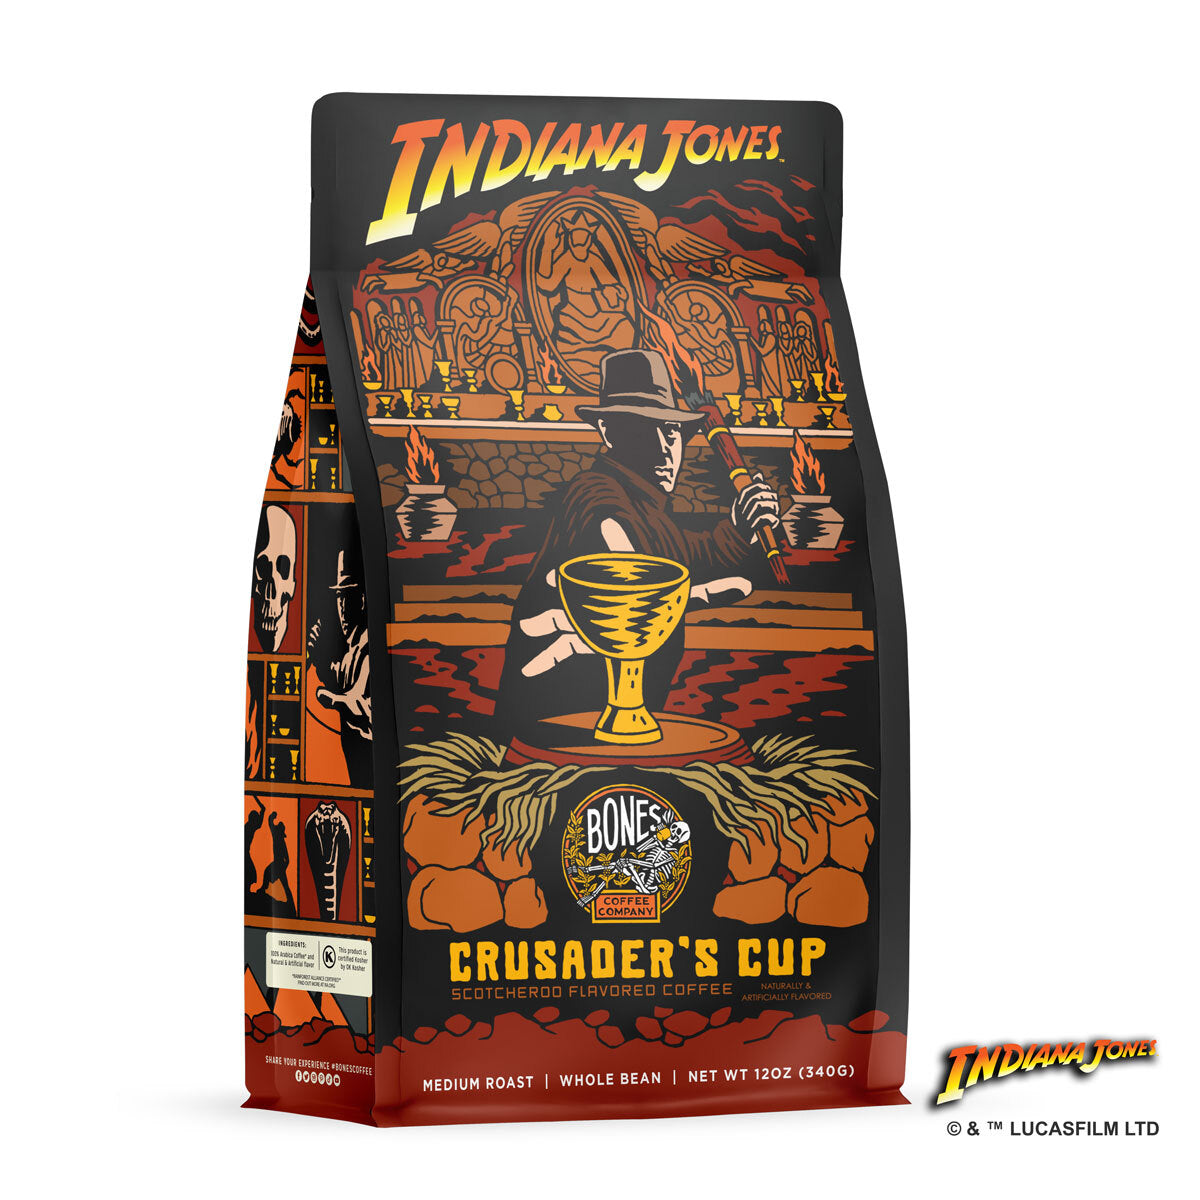 The front of a 12 ounce bag of Bones Coffee Company Crusader’s Cup coffee inspired by Lucasfilm Indiana Jones. Its flavor is scotcheroo and it has Indiana Jones reaching for a gold cup on the art.